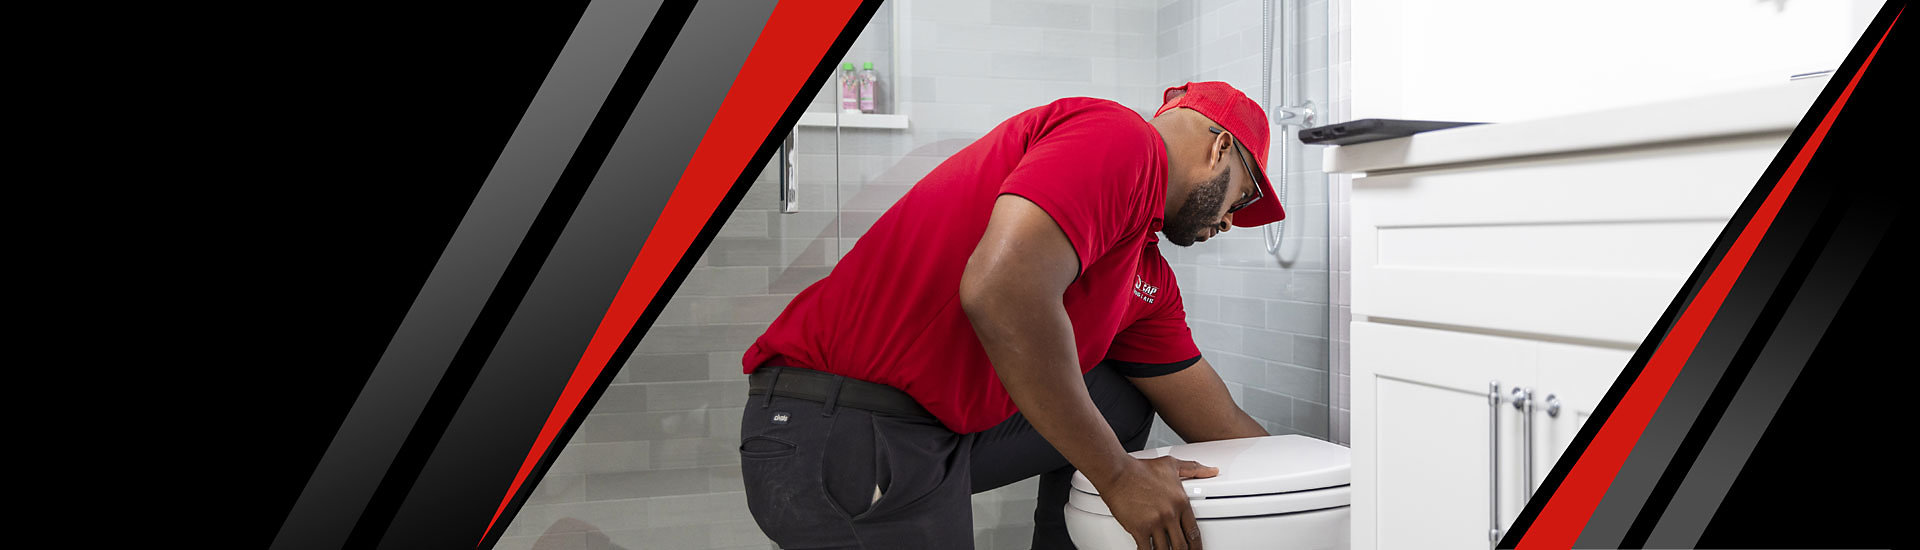 A Red Cap technician checking a toilet in a bathroom house